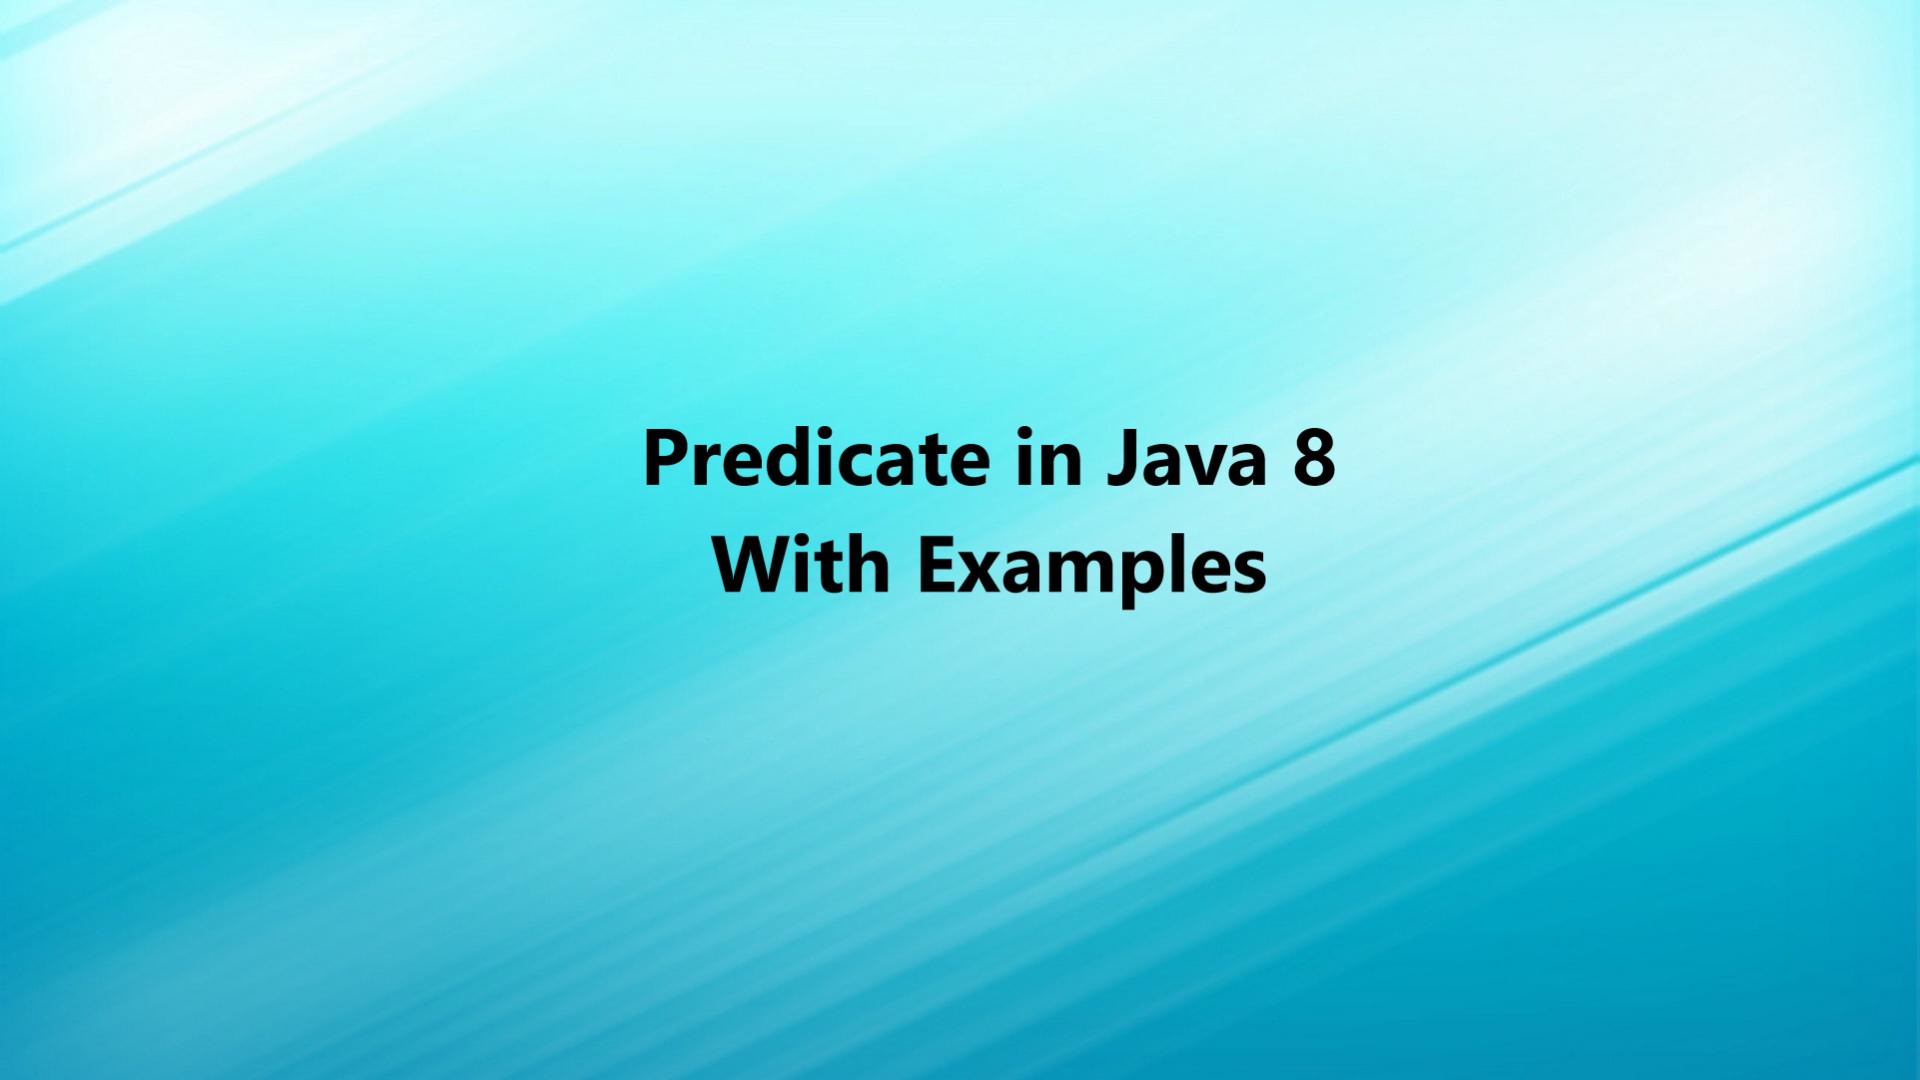 Predicate in Java 8 With Examples